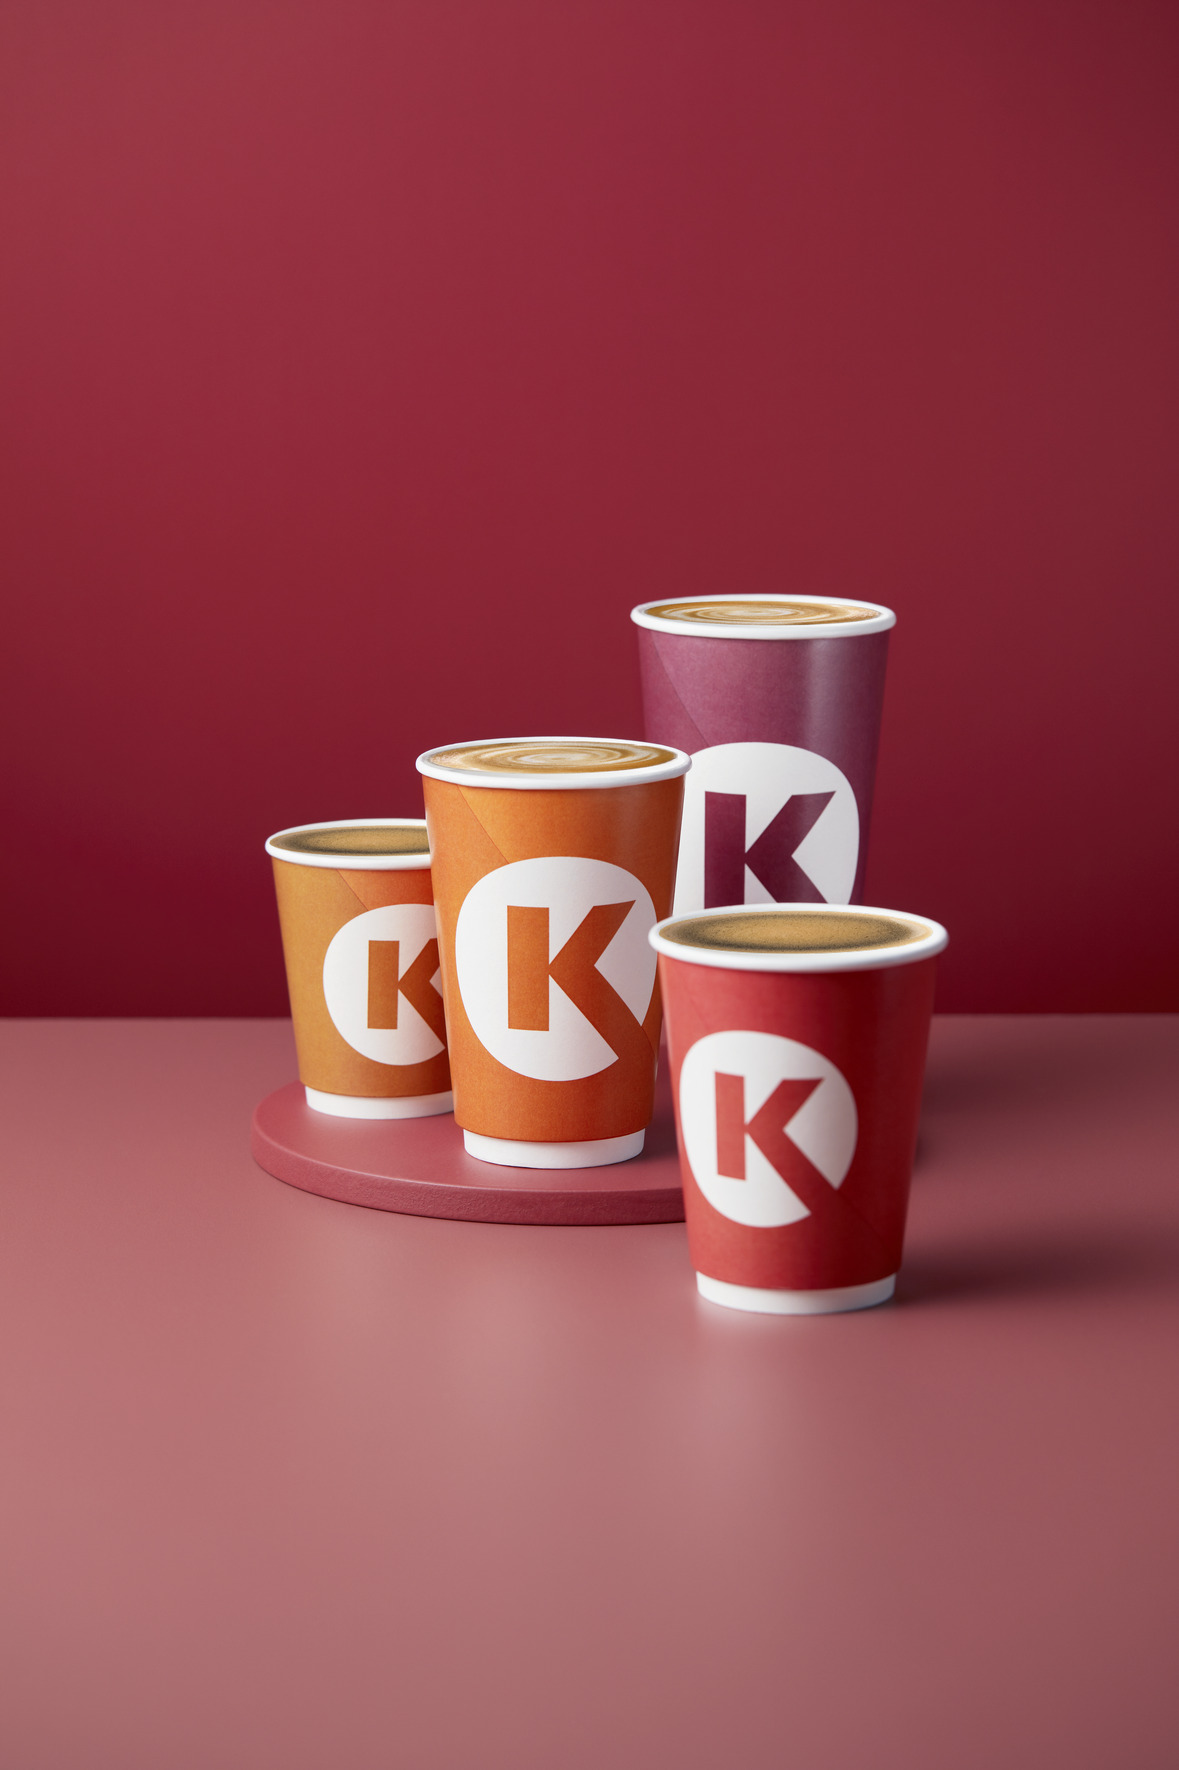 Circle K caters to Ireland’s growing army of coffee lovers